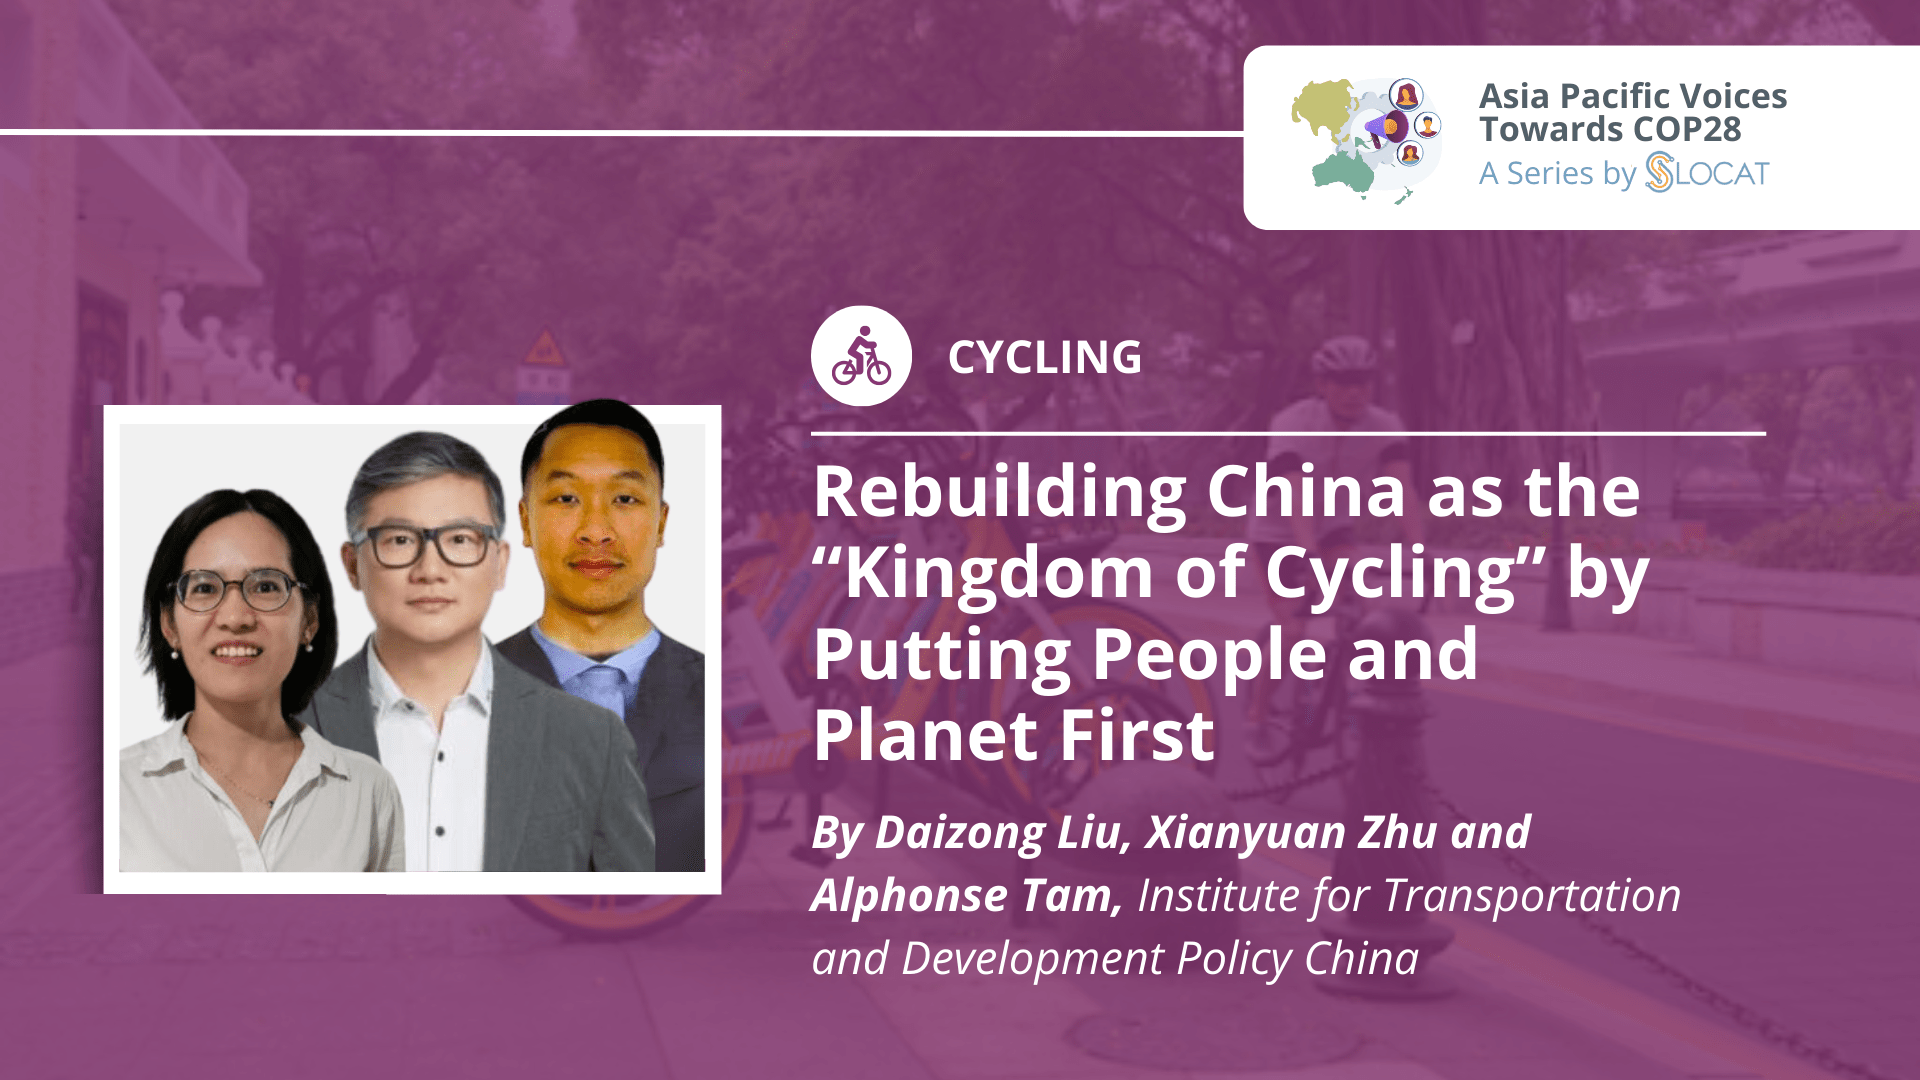 Rebuilding China as the “Kingdom of Cycling” by Putting People and Planet First